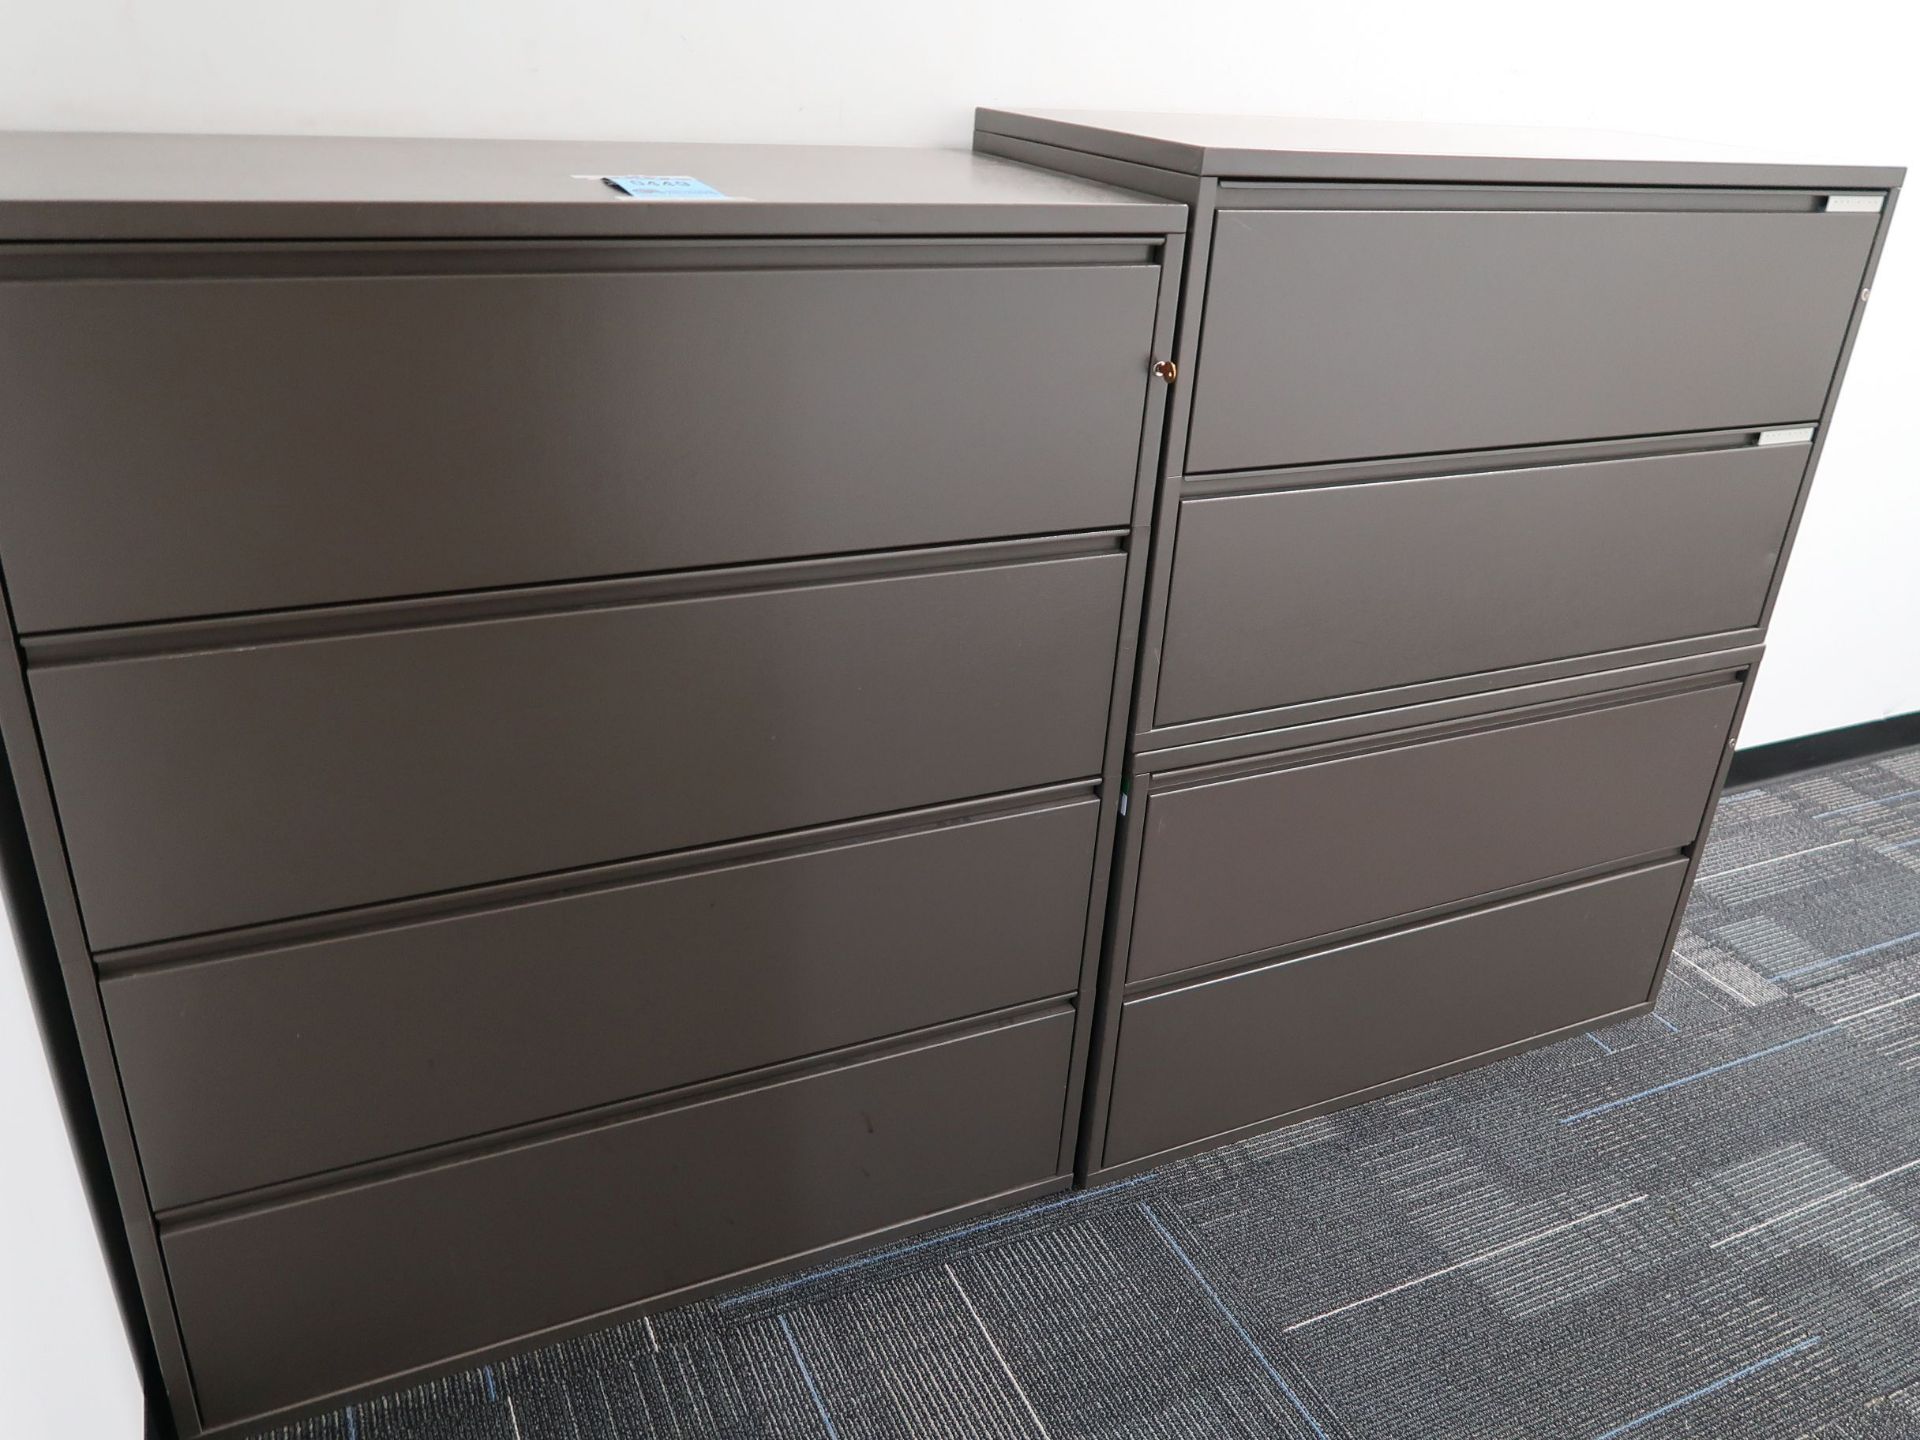 (1) FOUR-DRAWER AND (2) TWO-DRAWER METAL LATERAL FILE CABINETS